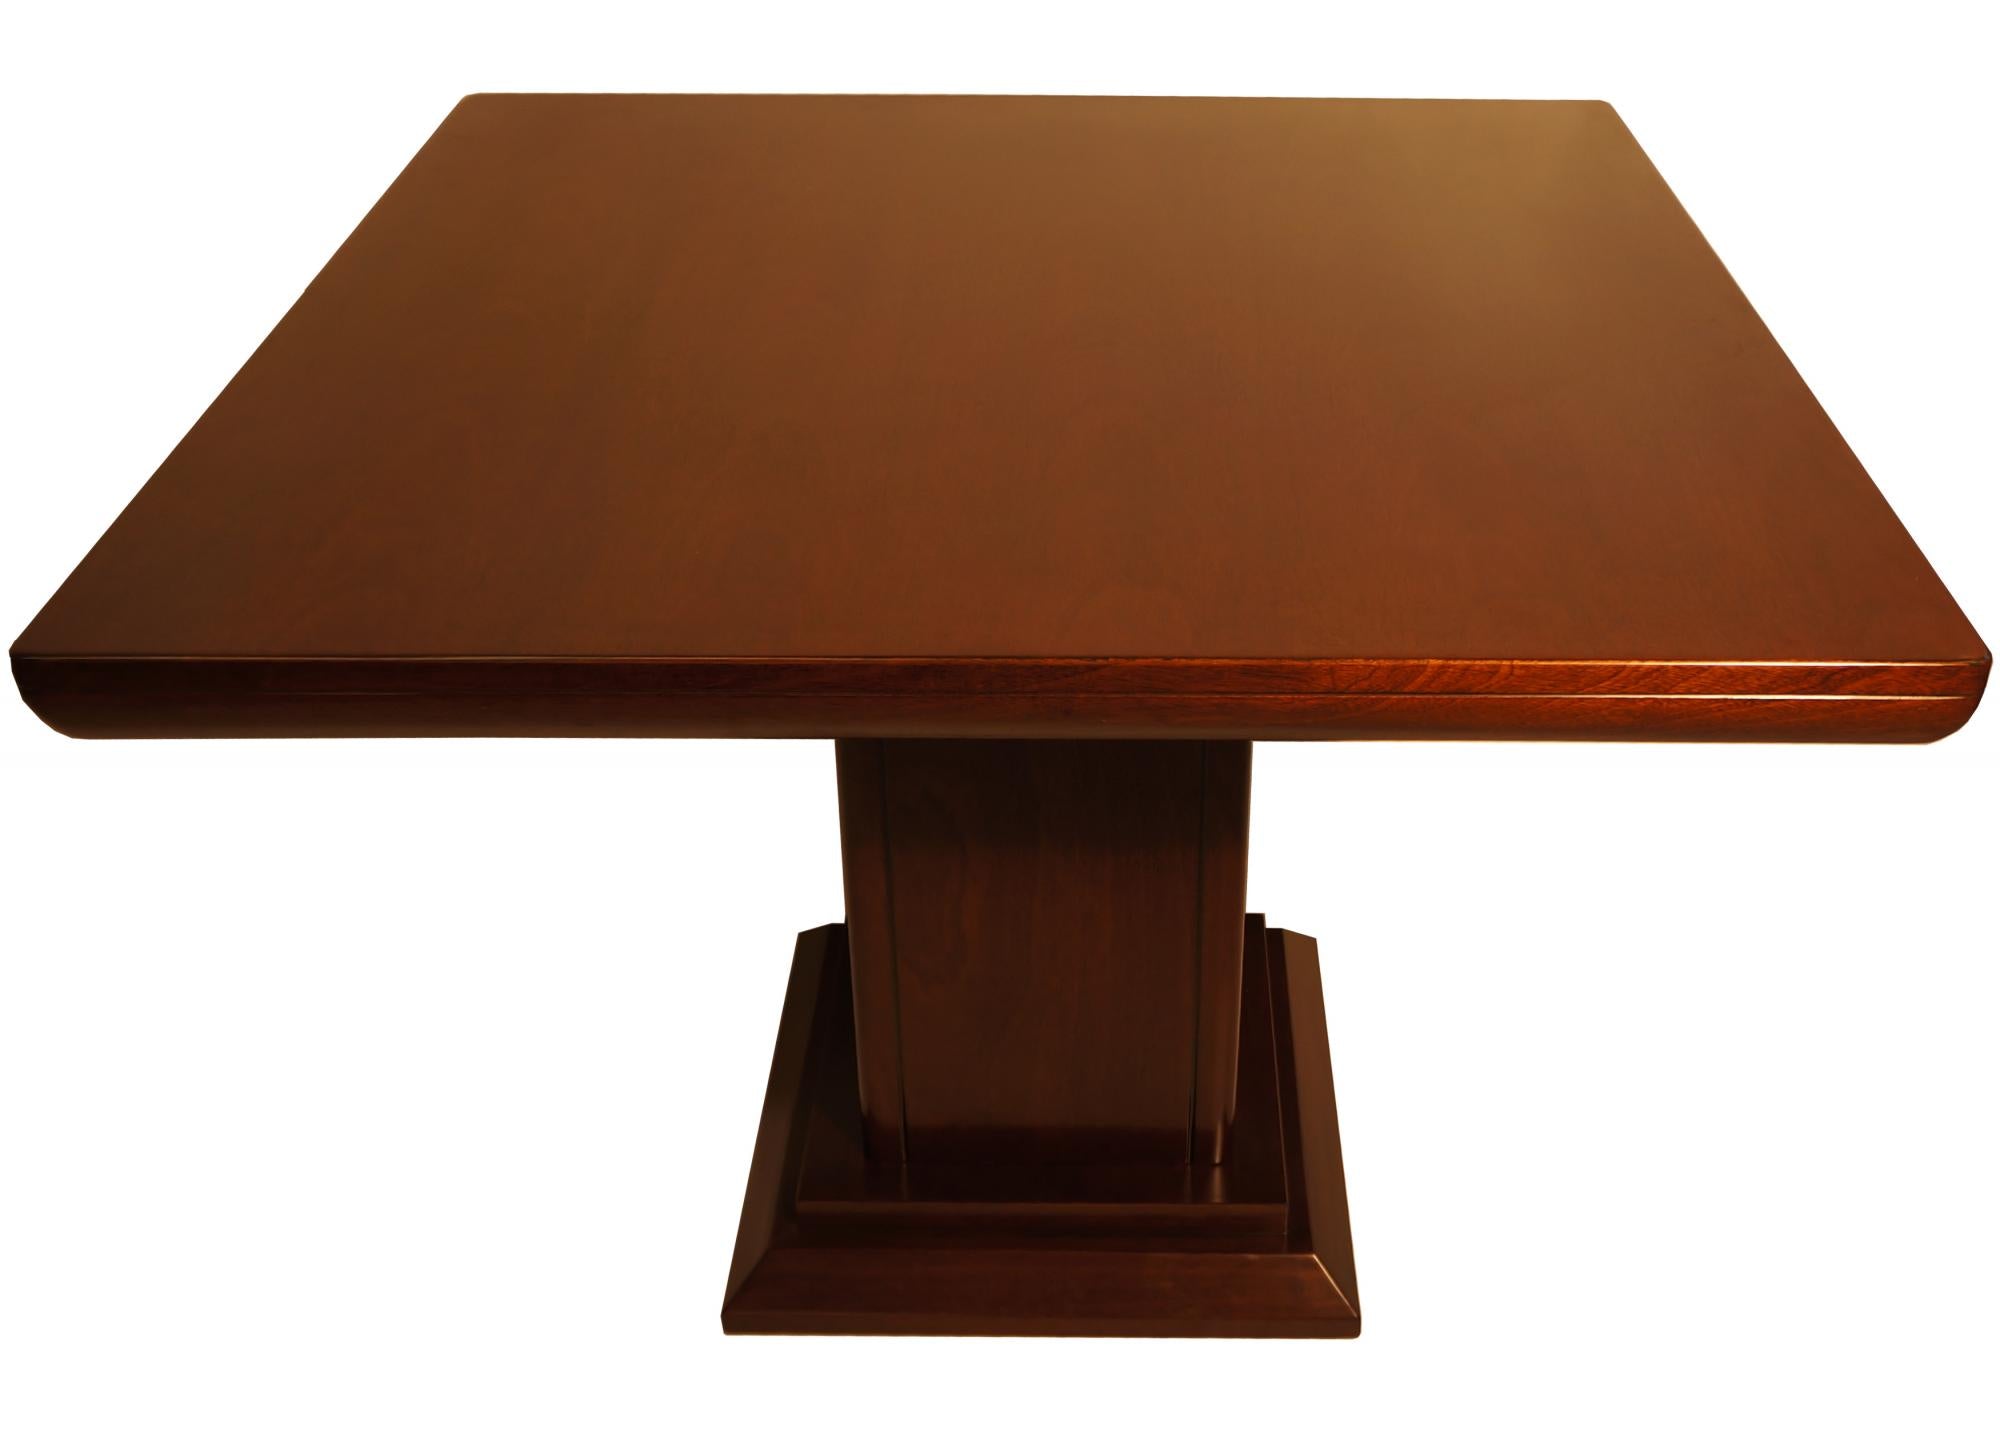 Square Meeting Table One Central Leg - LAT-MET-KT0911